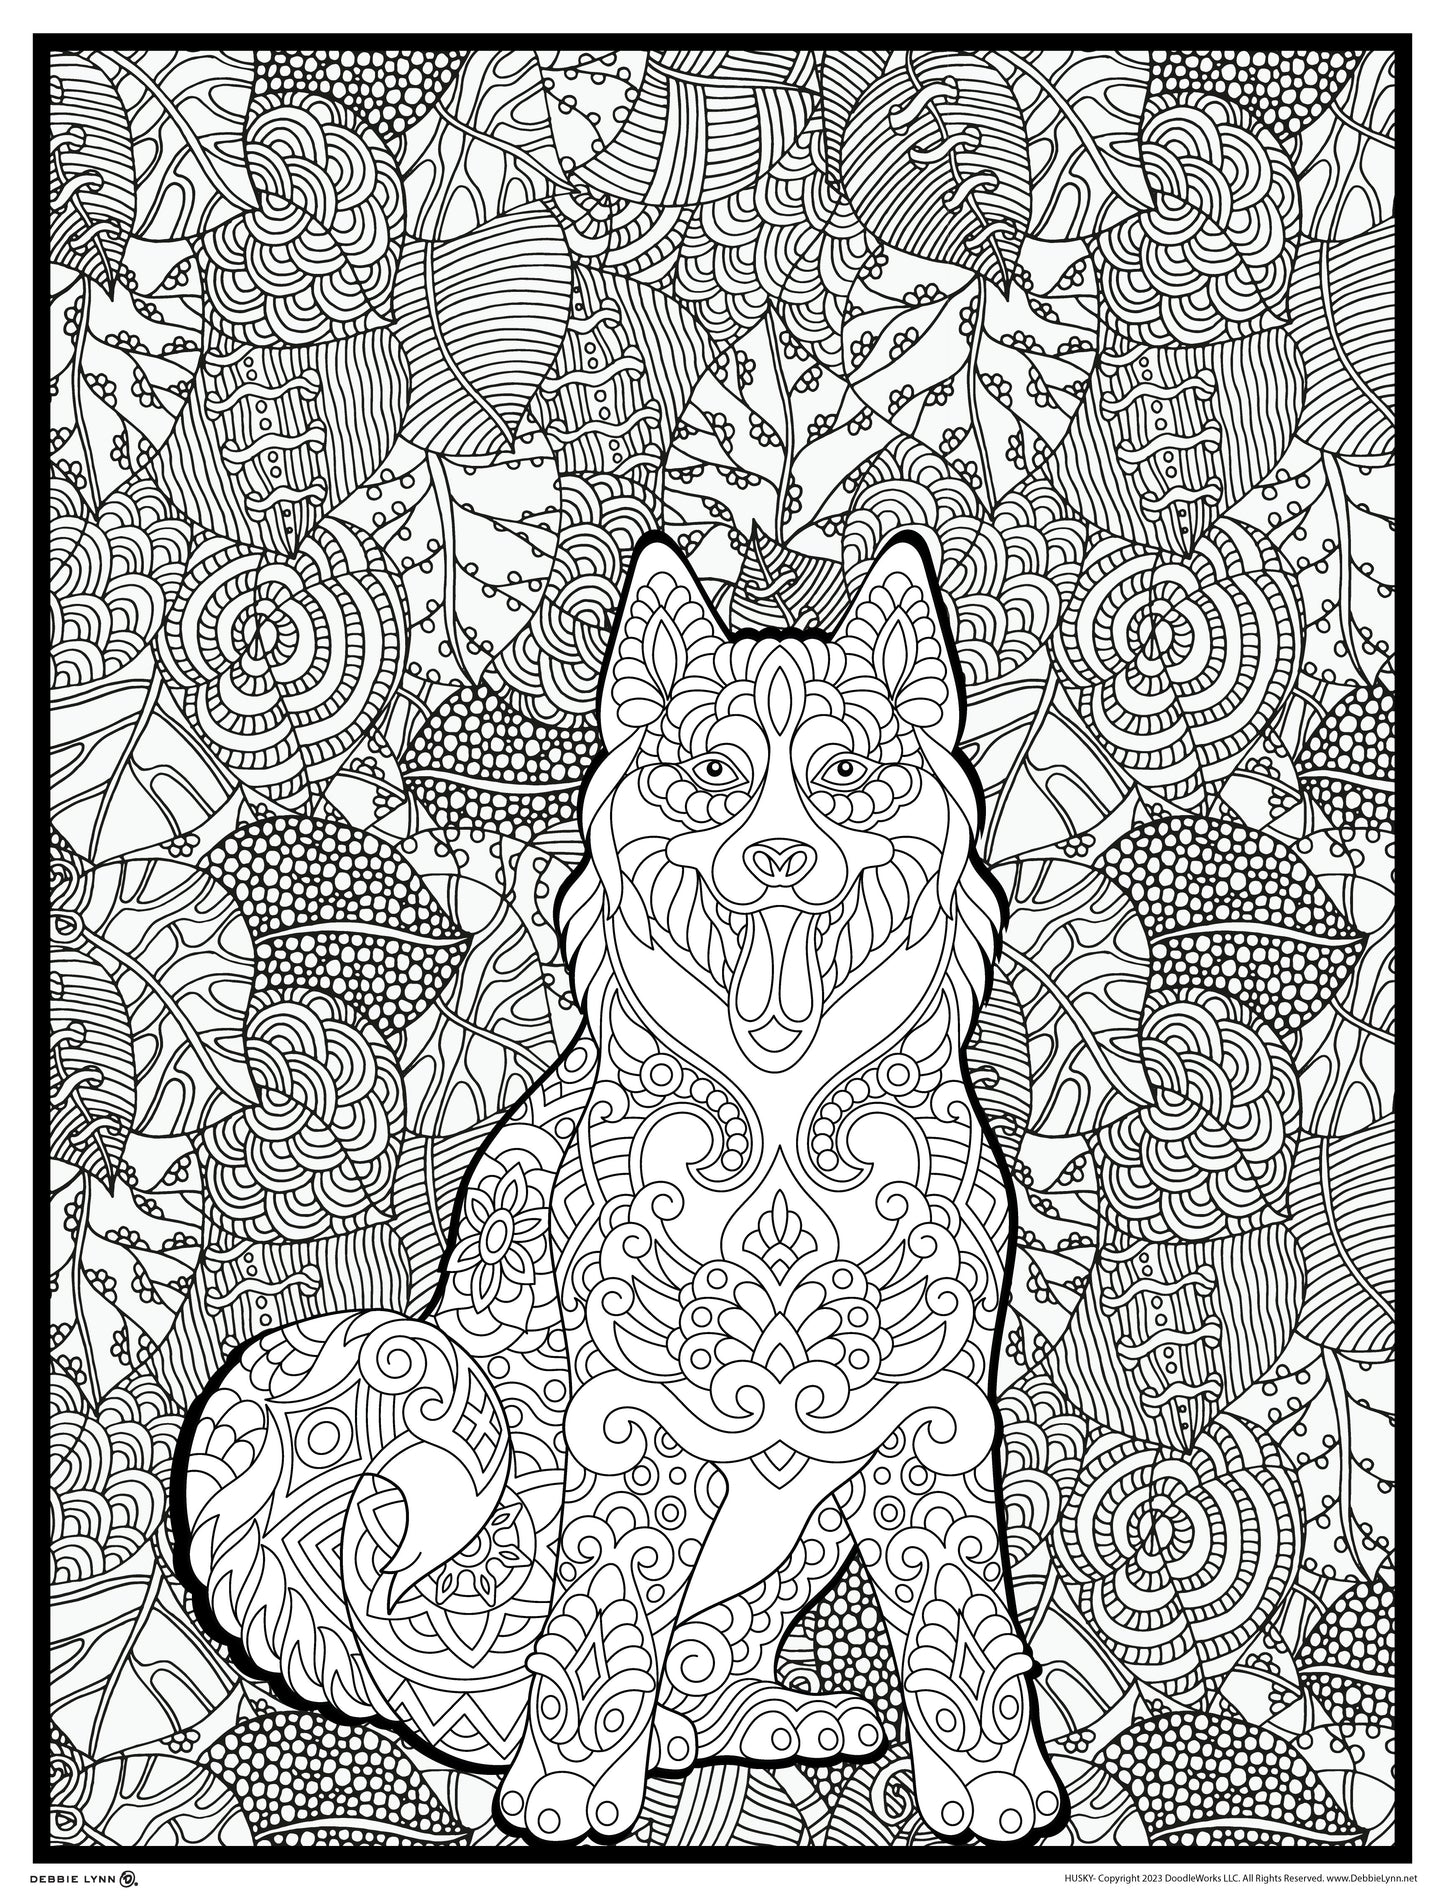 Husky Personalized Giant Coloring Poster  46"x60"